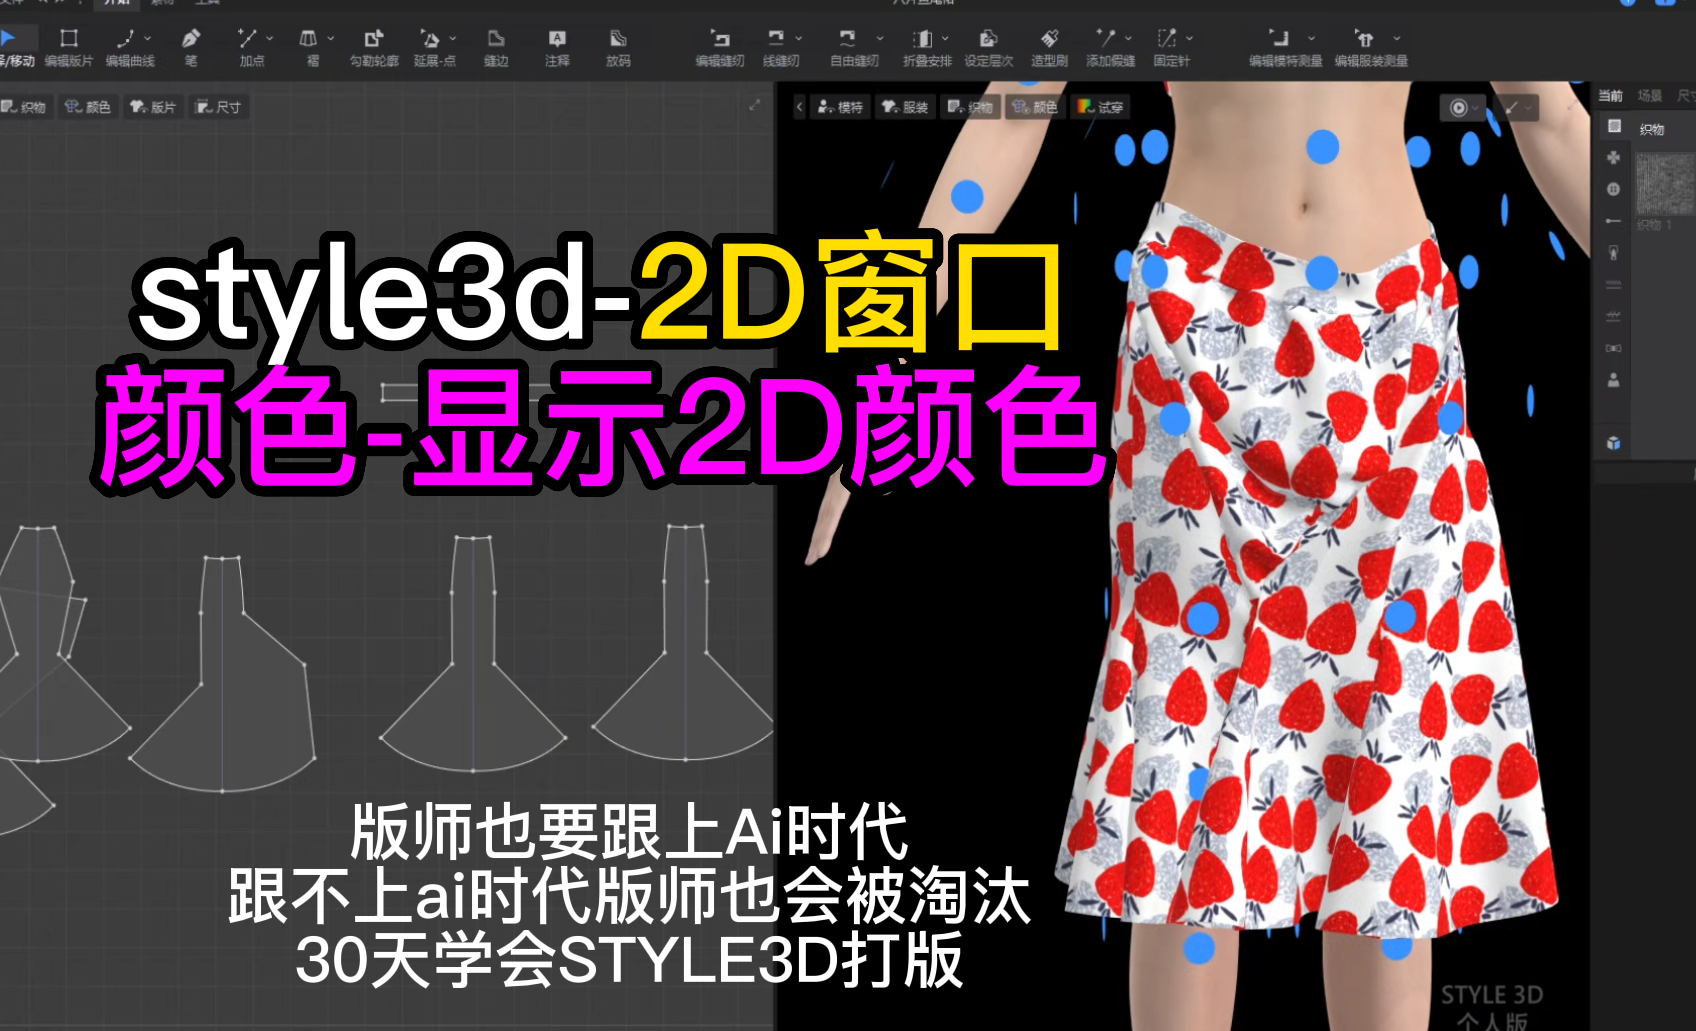 23-style3d2D窗口-颜色-显示2D颜色.png